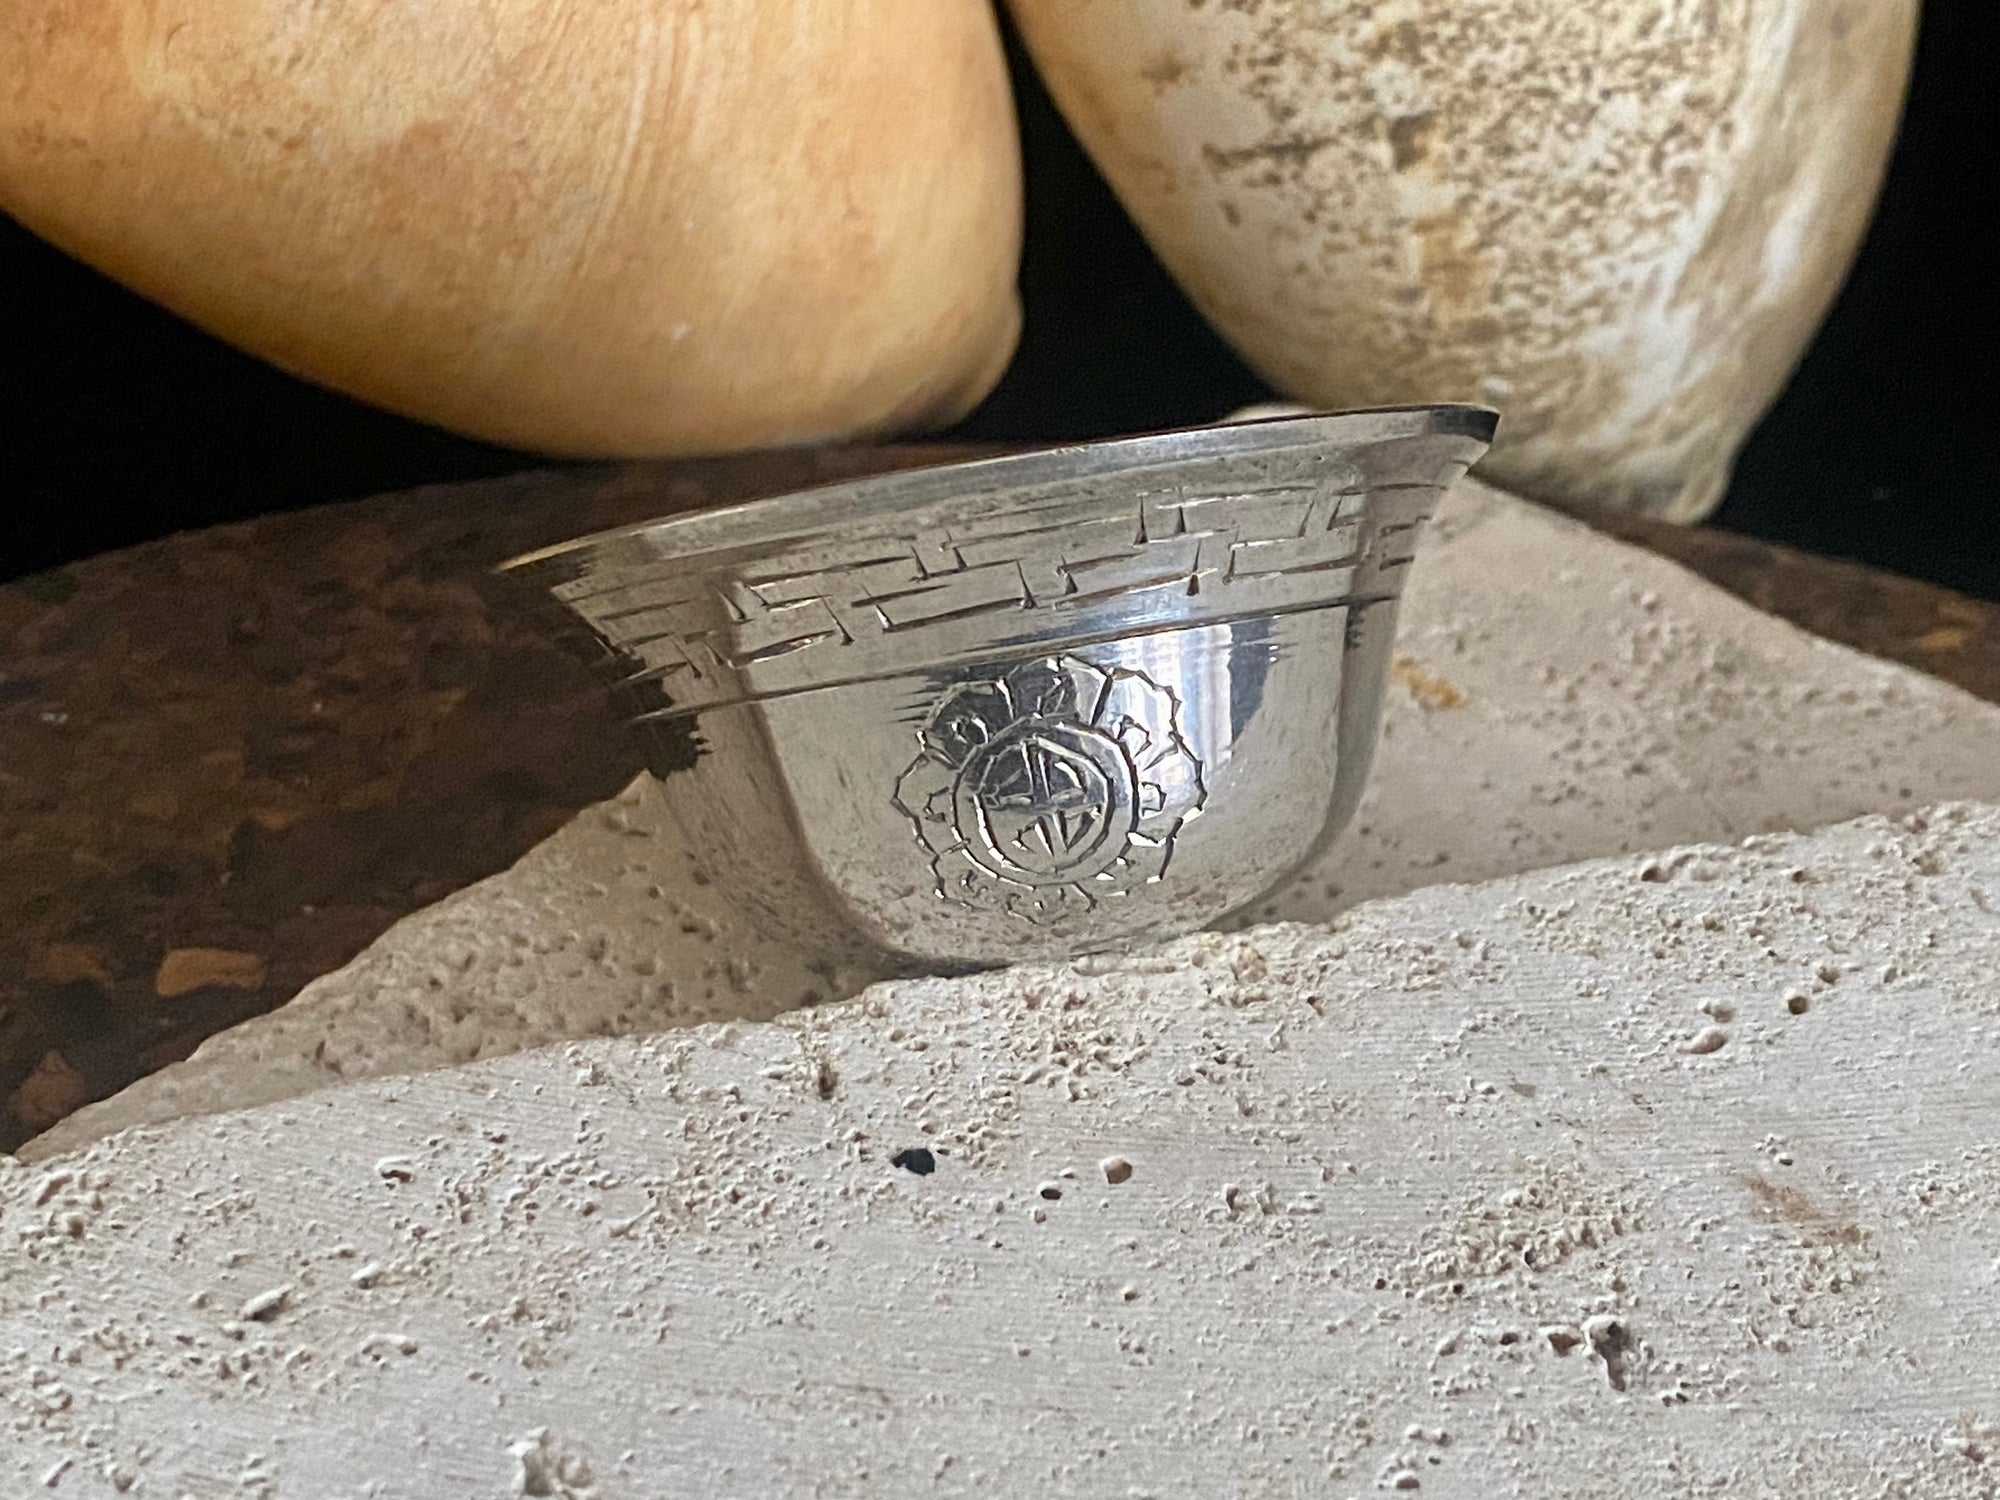 These offering bowls are metal finished with silver plate. They are decorated with repeating etched rim and flower medallions. From Nepal. These make beautiful miniature offering bowls and when filled with sand are perfect for holding incense. Measurements: 3 cm height, diameter at top 6 cm